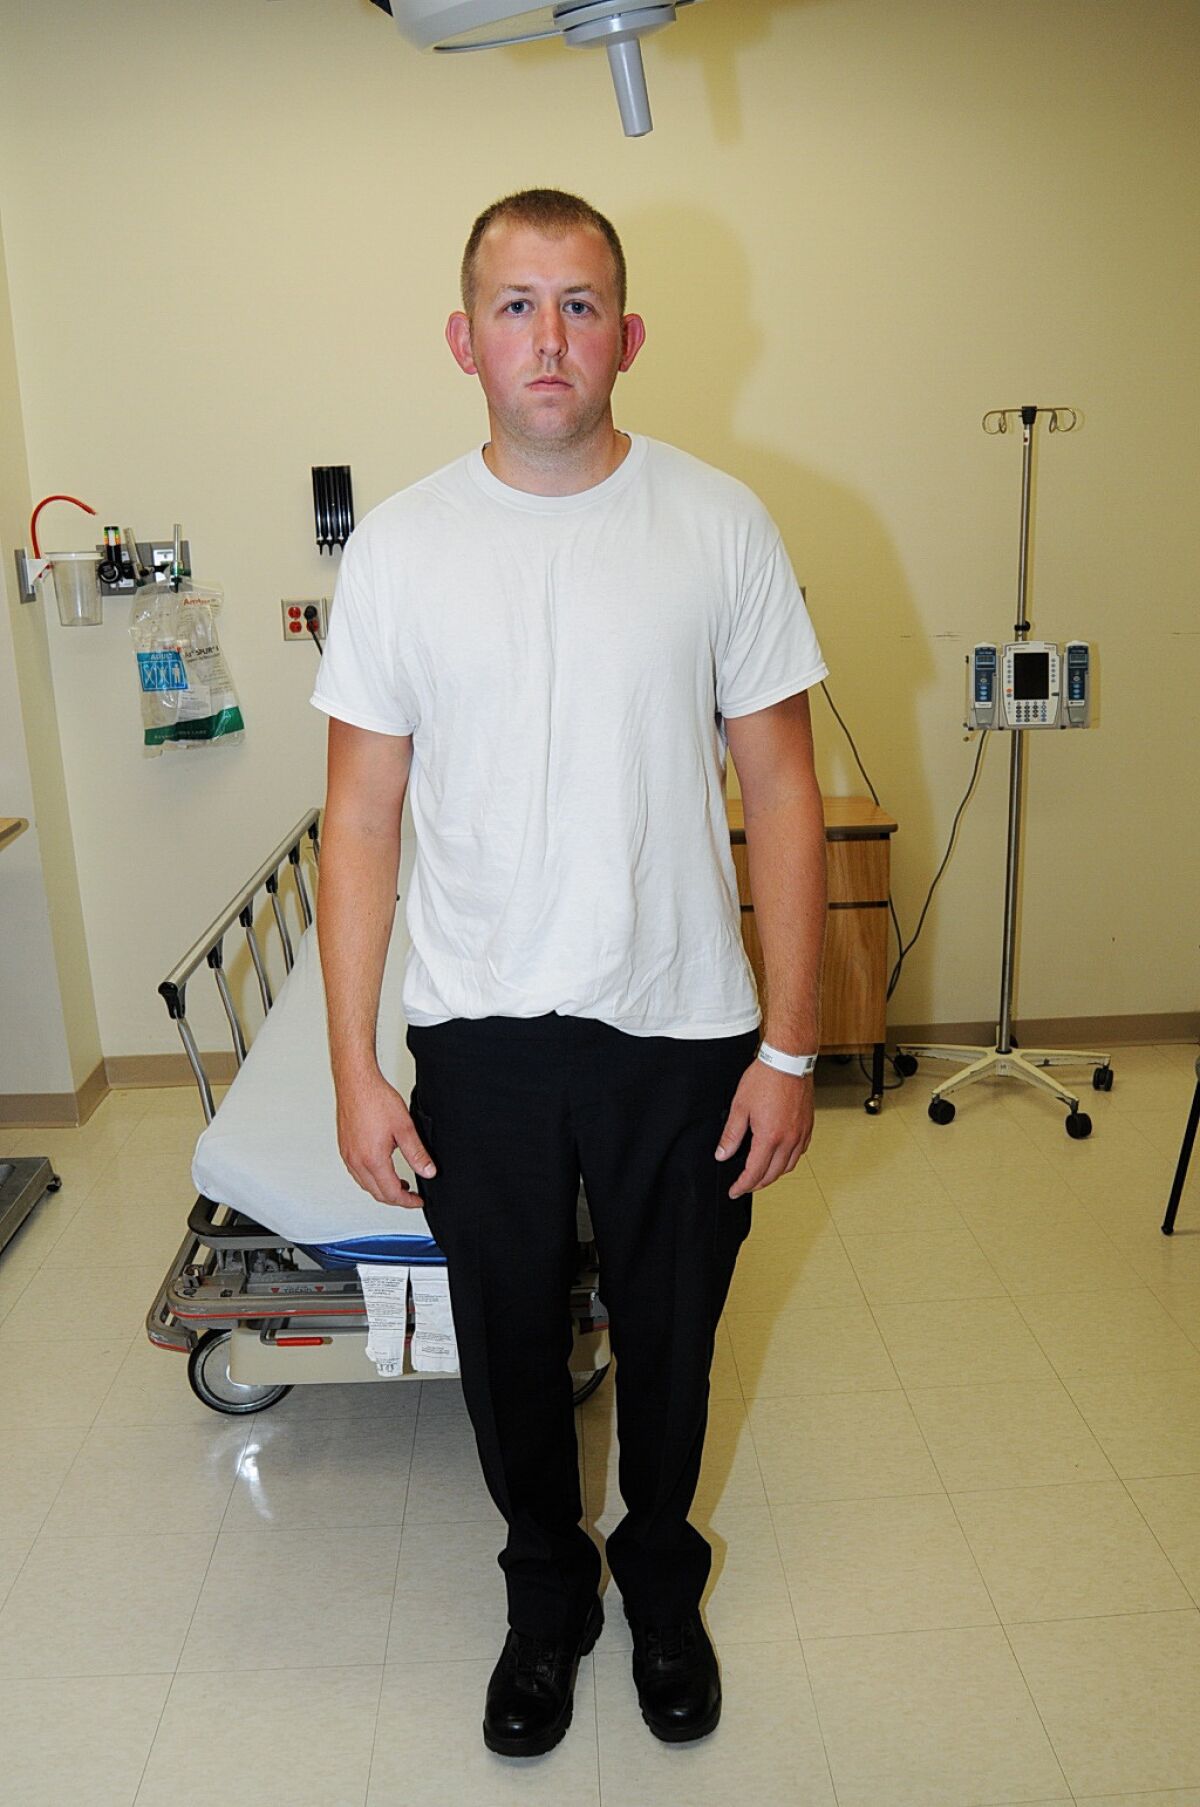 Photos made available after the grand jury announcement on Monday night show Ferguson police officer Darren Wilson after being involved in the shooting death of 18-year-old Michael Brown on Aug. 9.---Photos by St. Louis County Prosecutors office